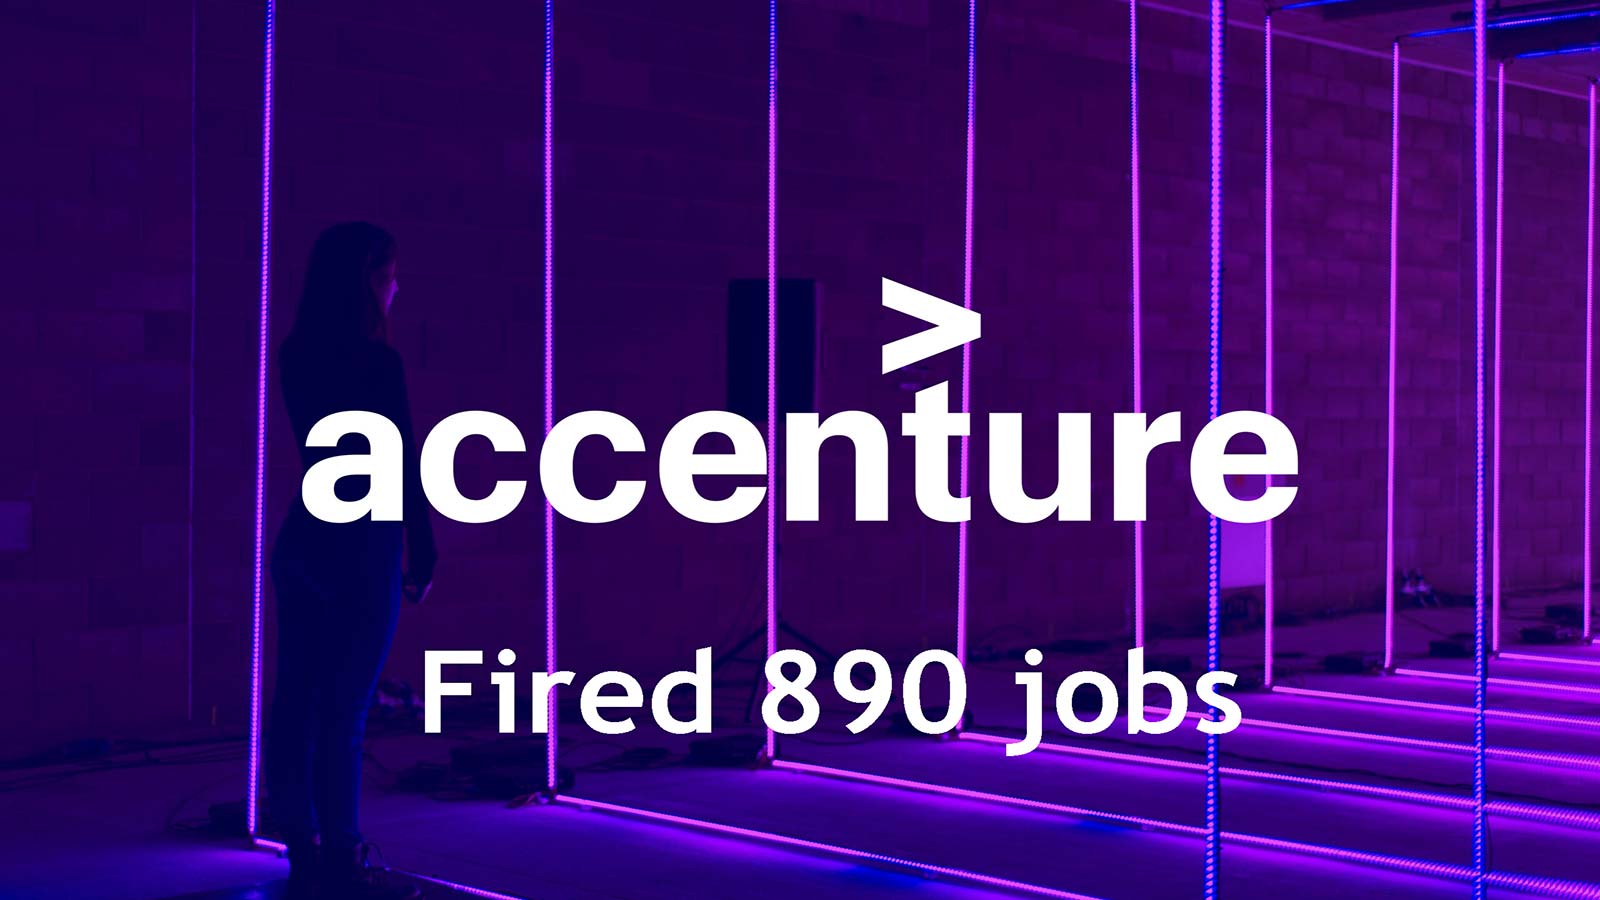 Accenture to cut 890 jobs from Irish operations